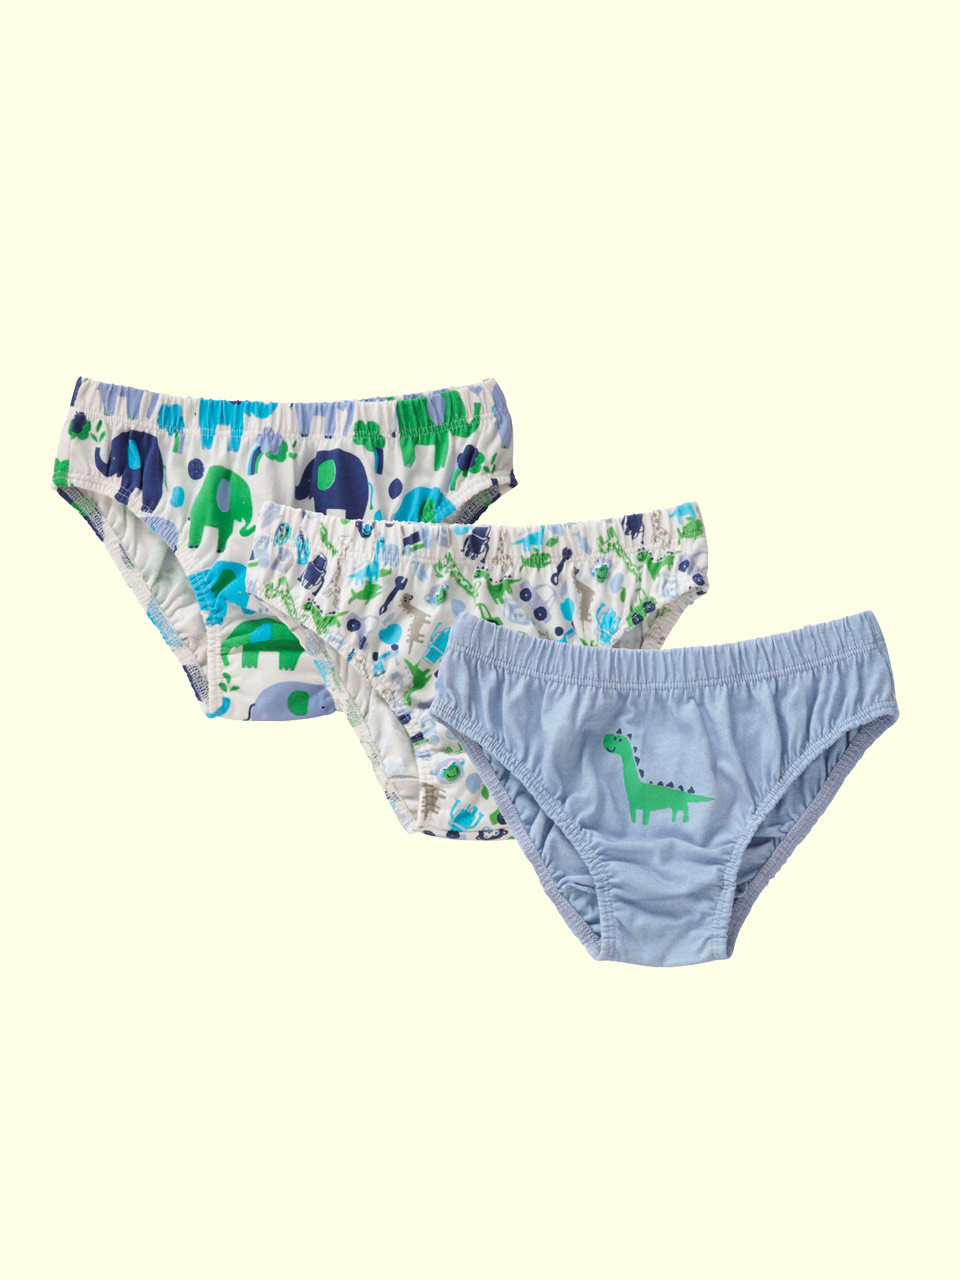 100% Organic Cotton Boys Underwear for 2 to 5 years old